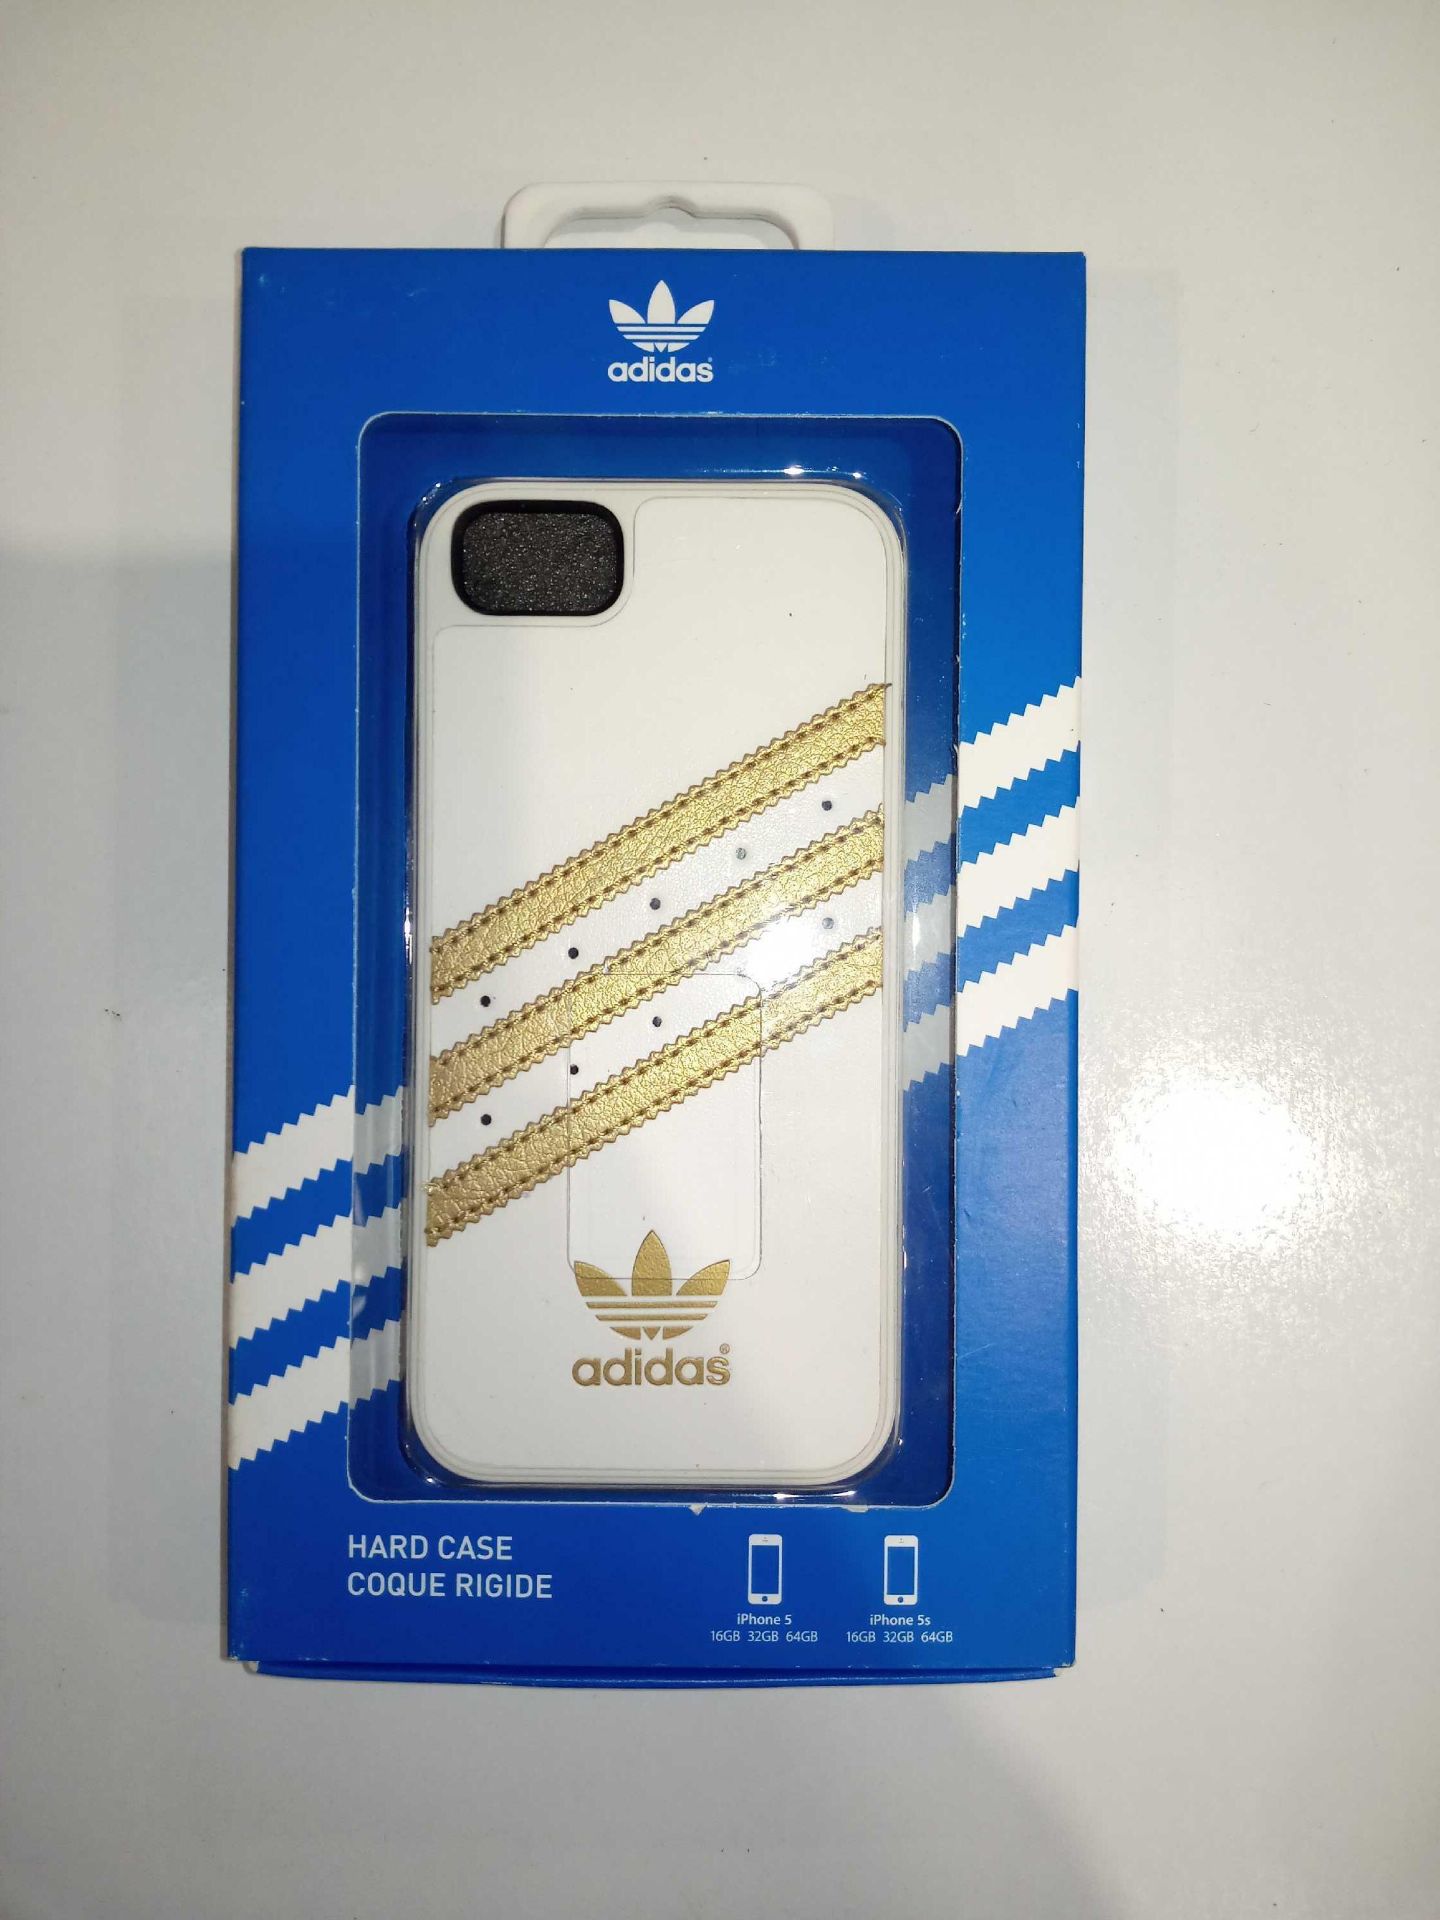 Lots Of Contain 20 Brand New Apple Iphone 5 Adidas Phone Cases Combined Rrp £200 (Pictures Are For